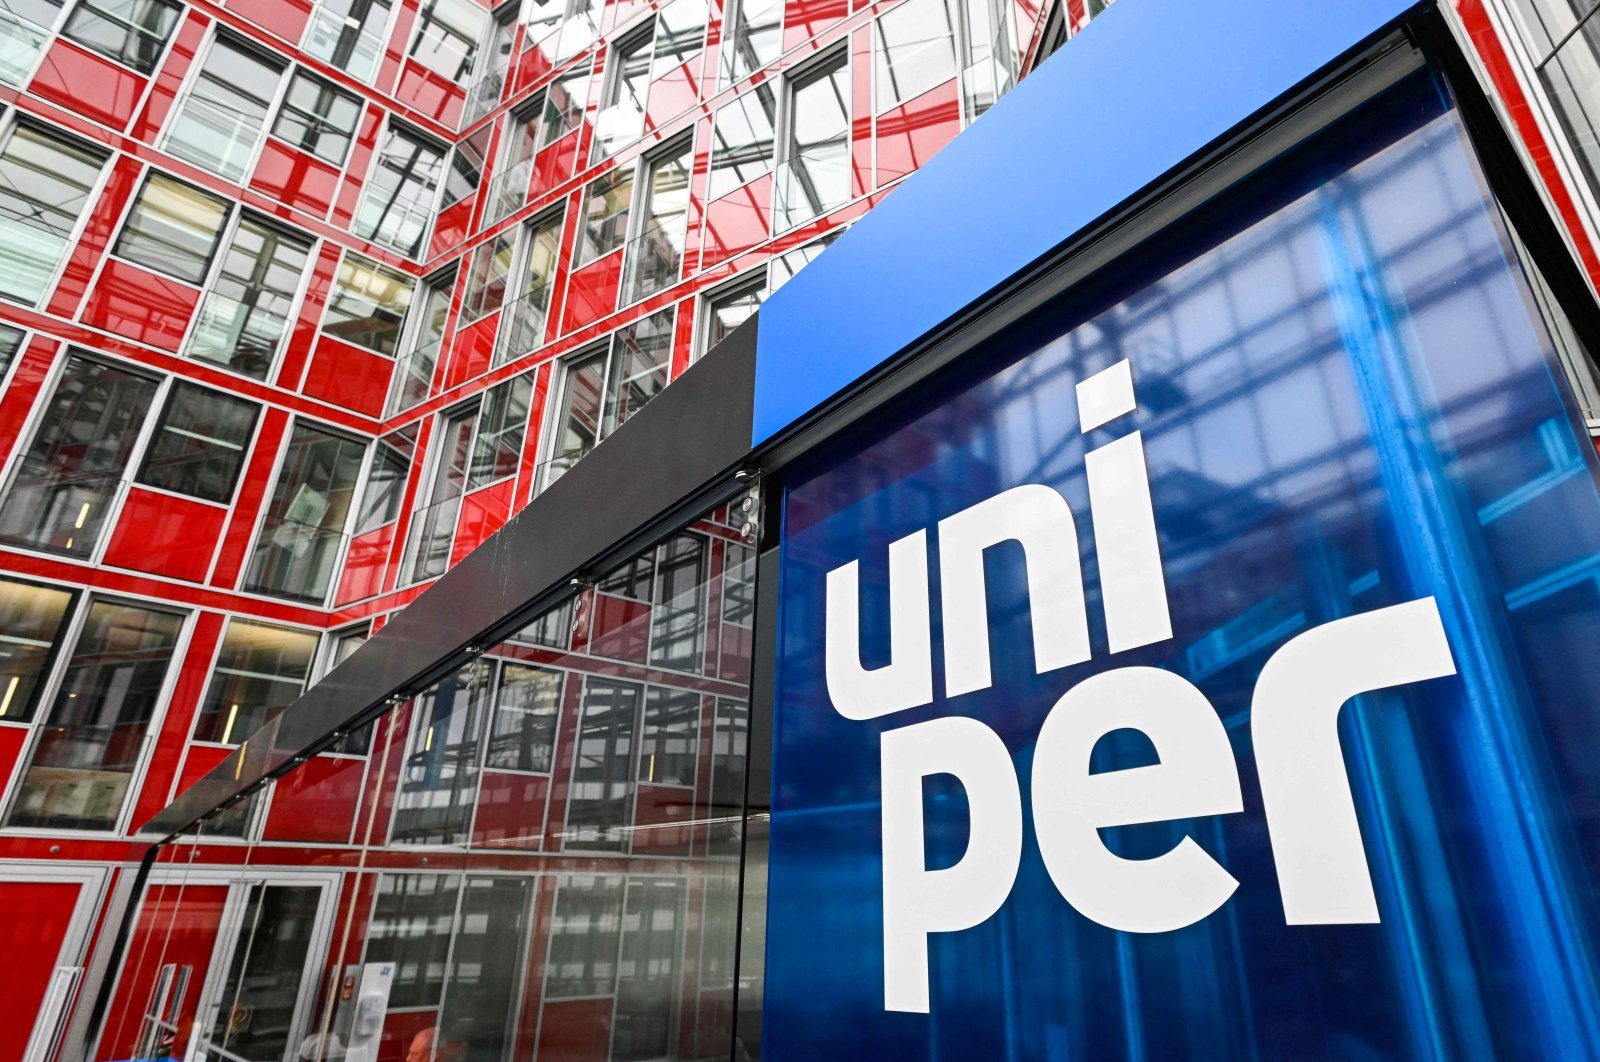 The logo of energy supplier Uniper in the entrance hall at the company’s headquarters in Dusseldorf, western Germany, July 22, 2022. (AFP Photo)